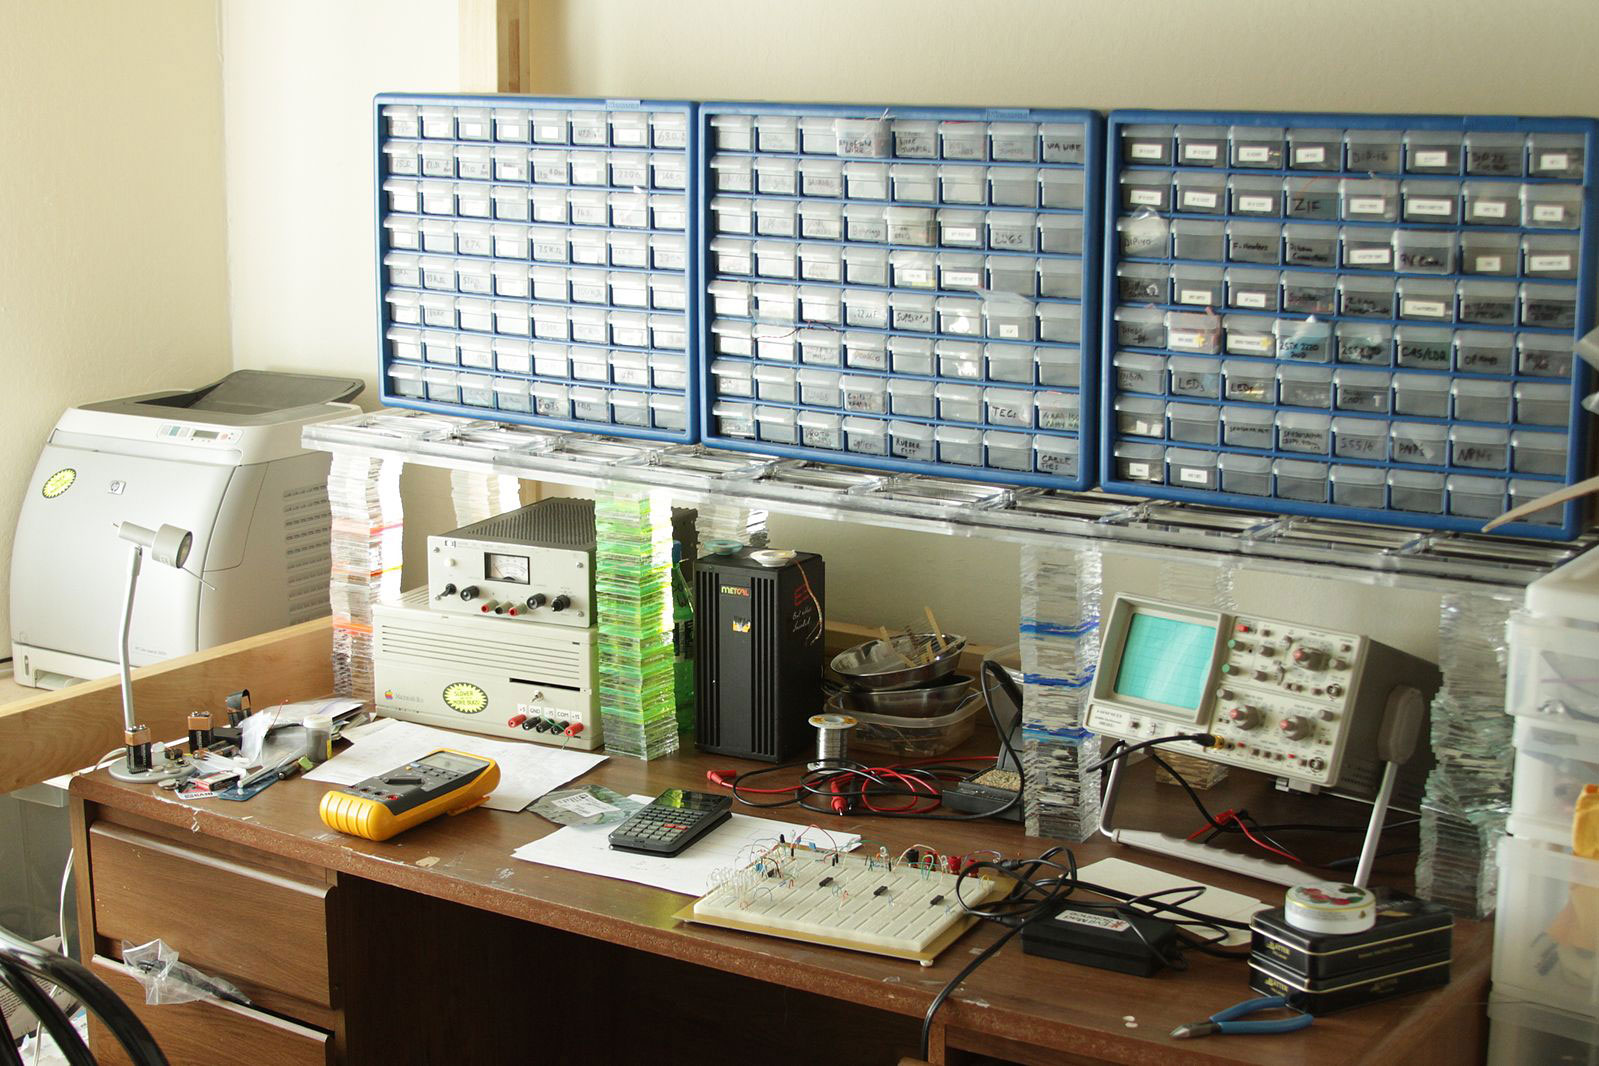 An electronics workbench. Note the numerous storage shelves against the wall